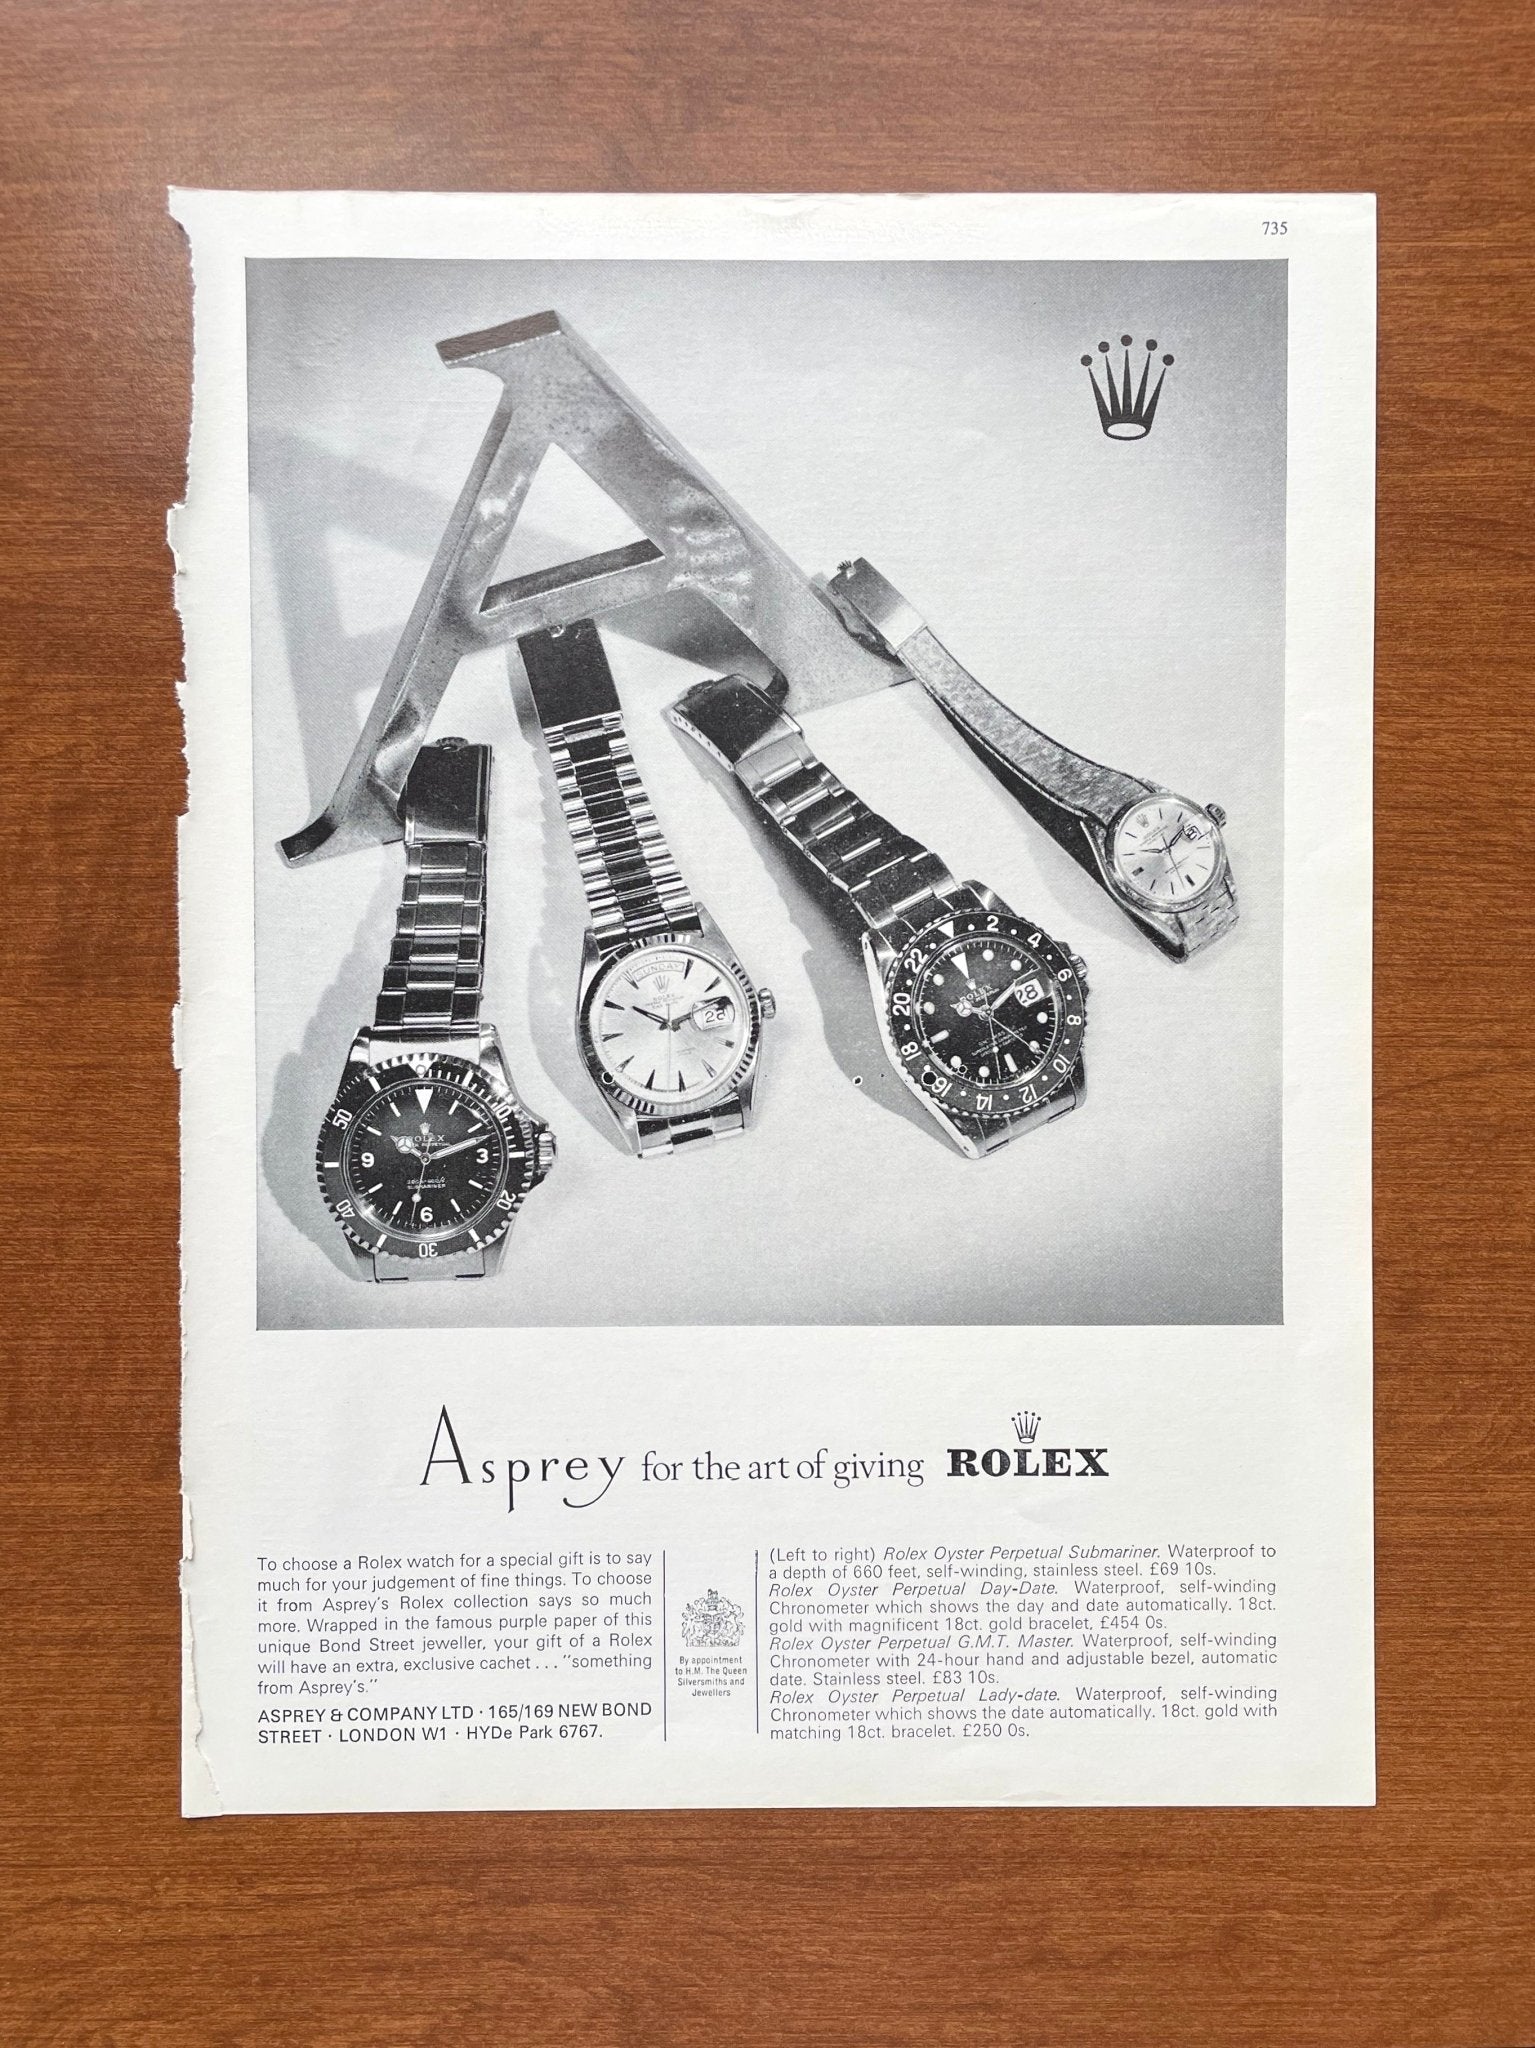 1966 Rolex GMT, Submariner, Day Date at Asprey "art of giving" Advertisement